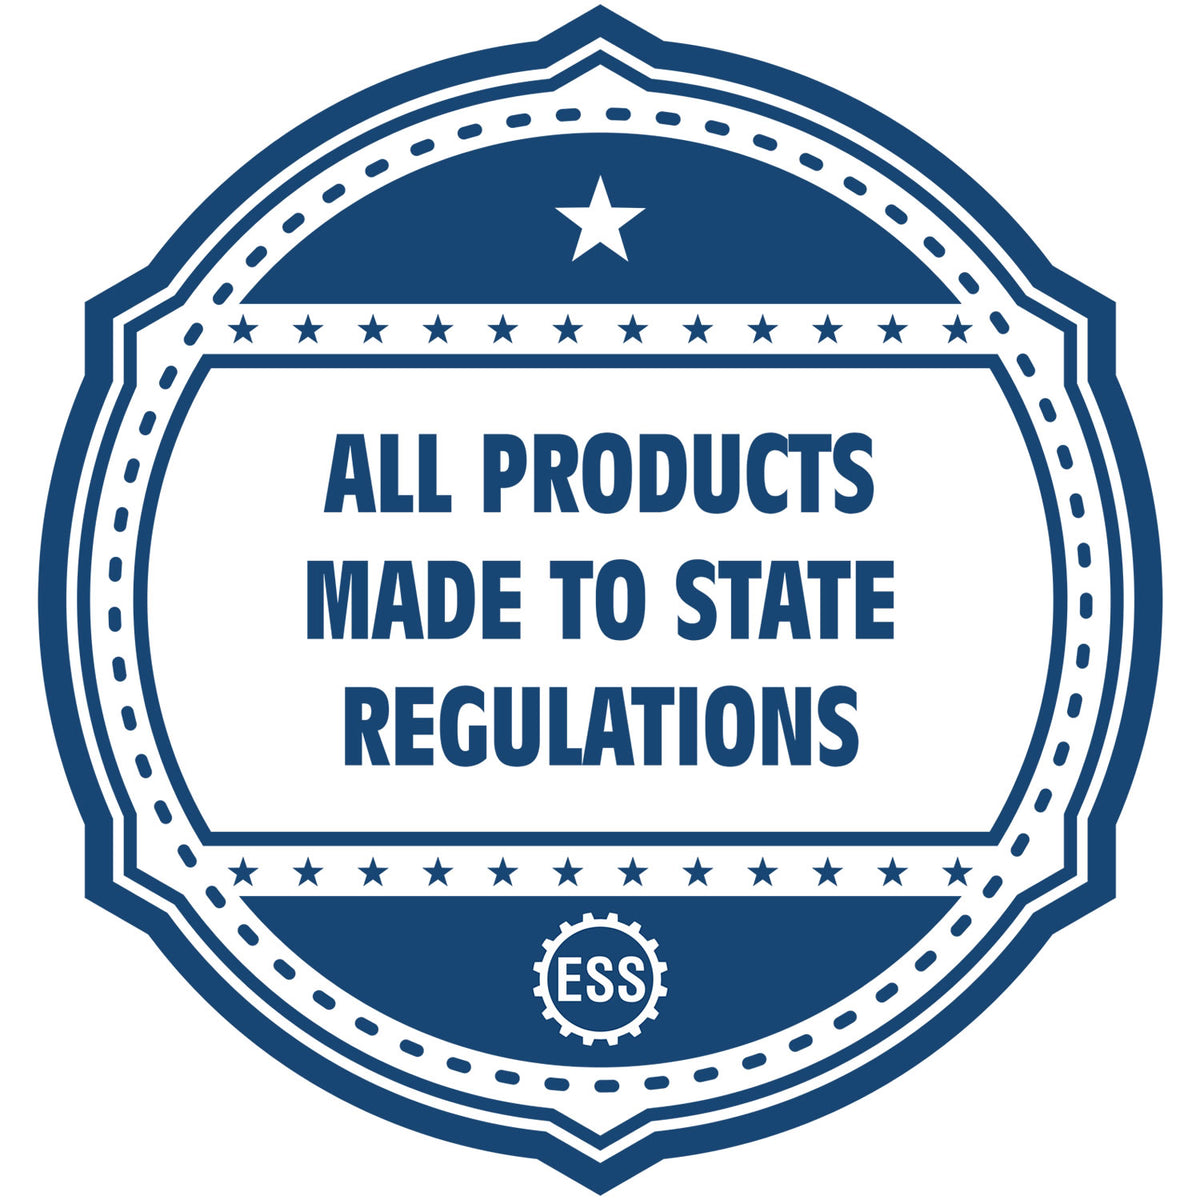 An icon or badge element for the Heavy-Duty Rhode Island Rectangular Notary Stamp showing that this product is made in compliance with state regulations.